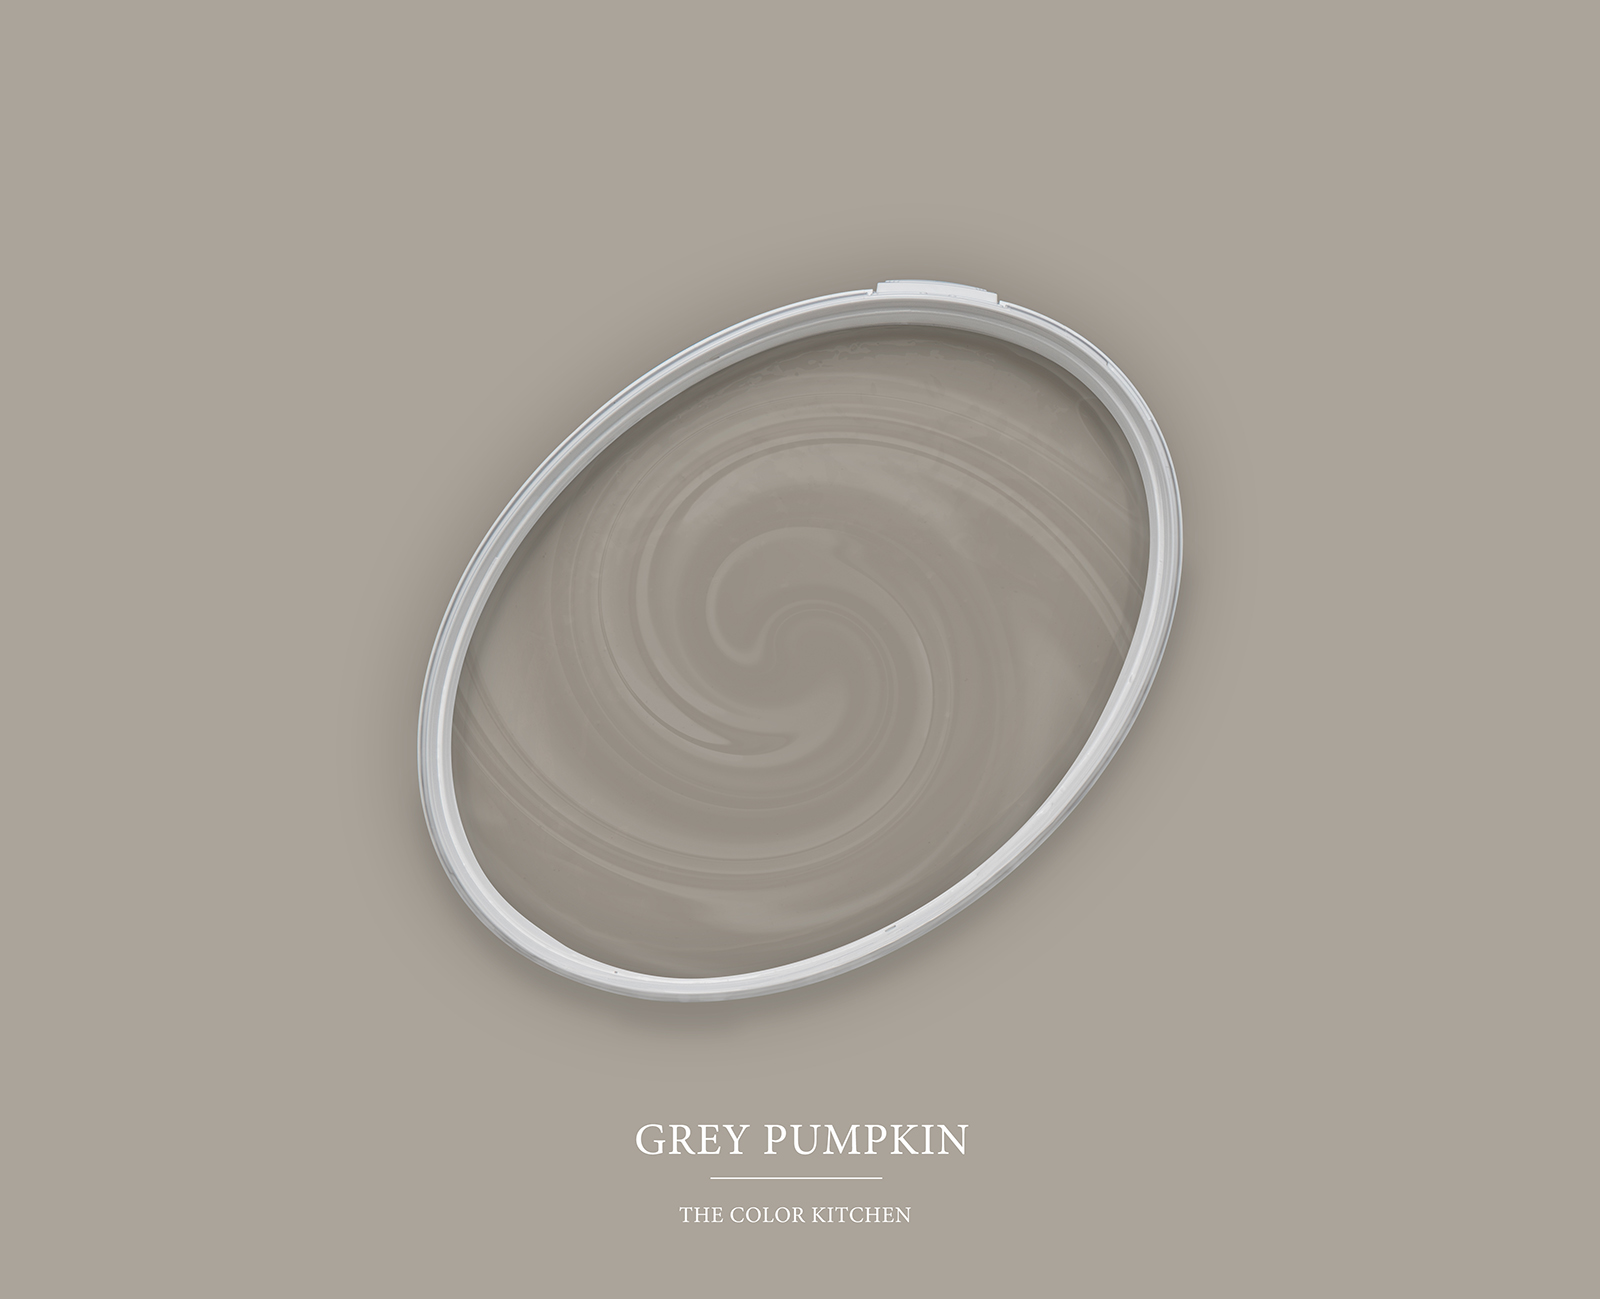         Wall Paint TCK1019 »Grey Pumpkin« in homely taupe – 2.5 litre
    